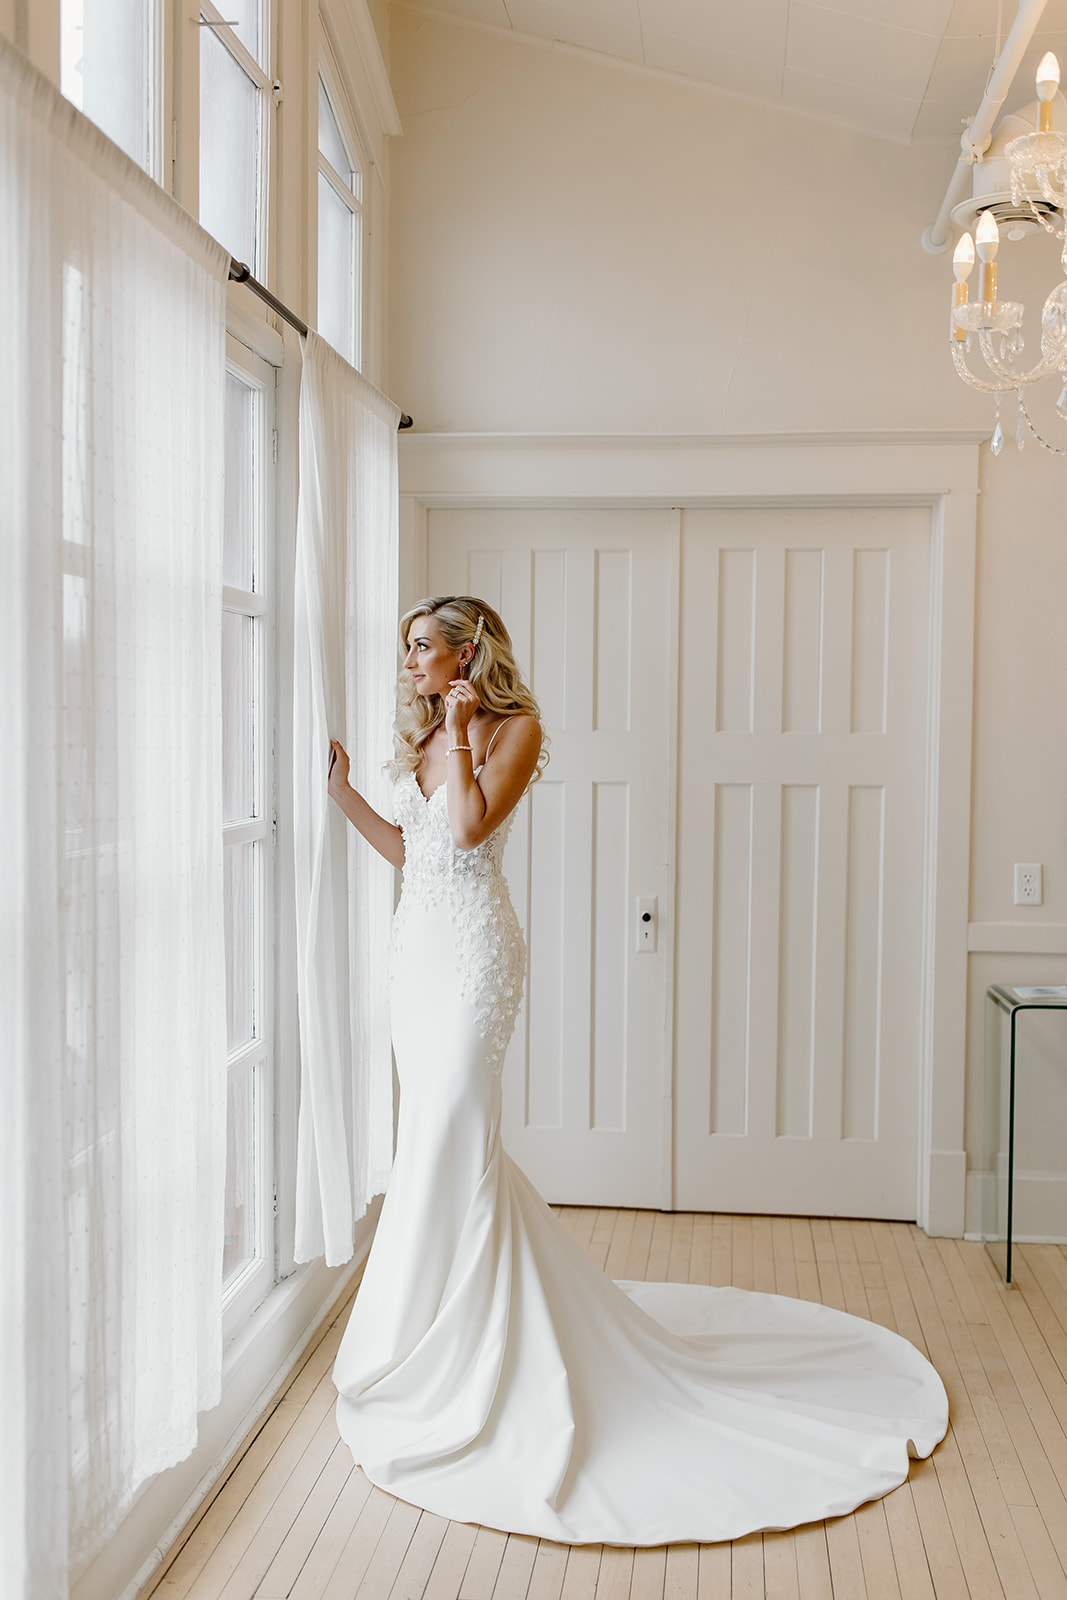 Bride standing next to a window as she gets ready on her wedding day.